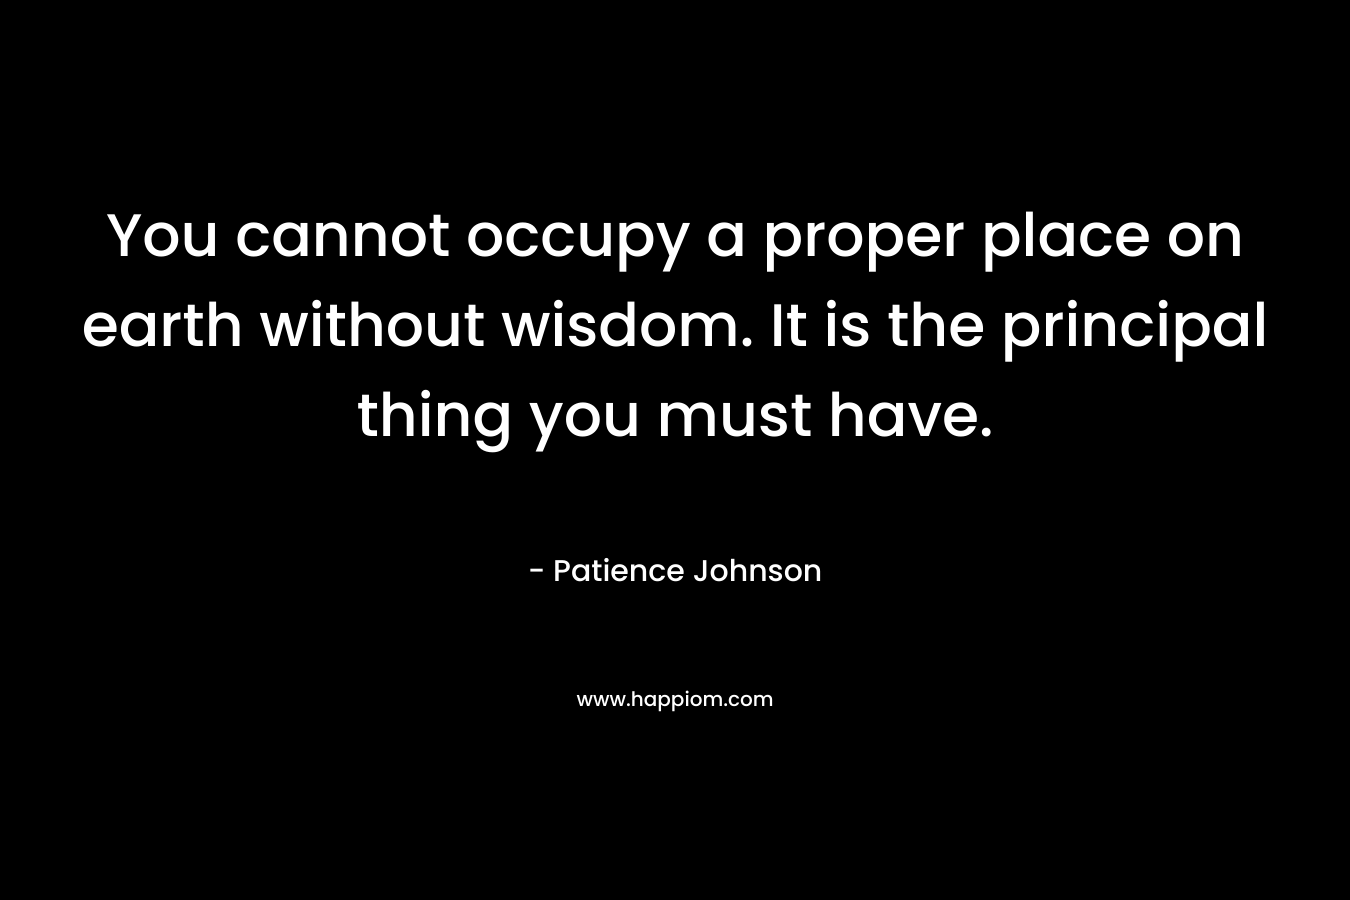 You cannot occupy a proper place on earth without wisdom. It is the principal thing you must have.